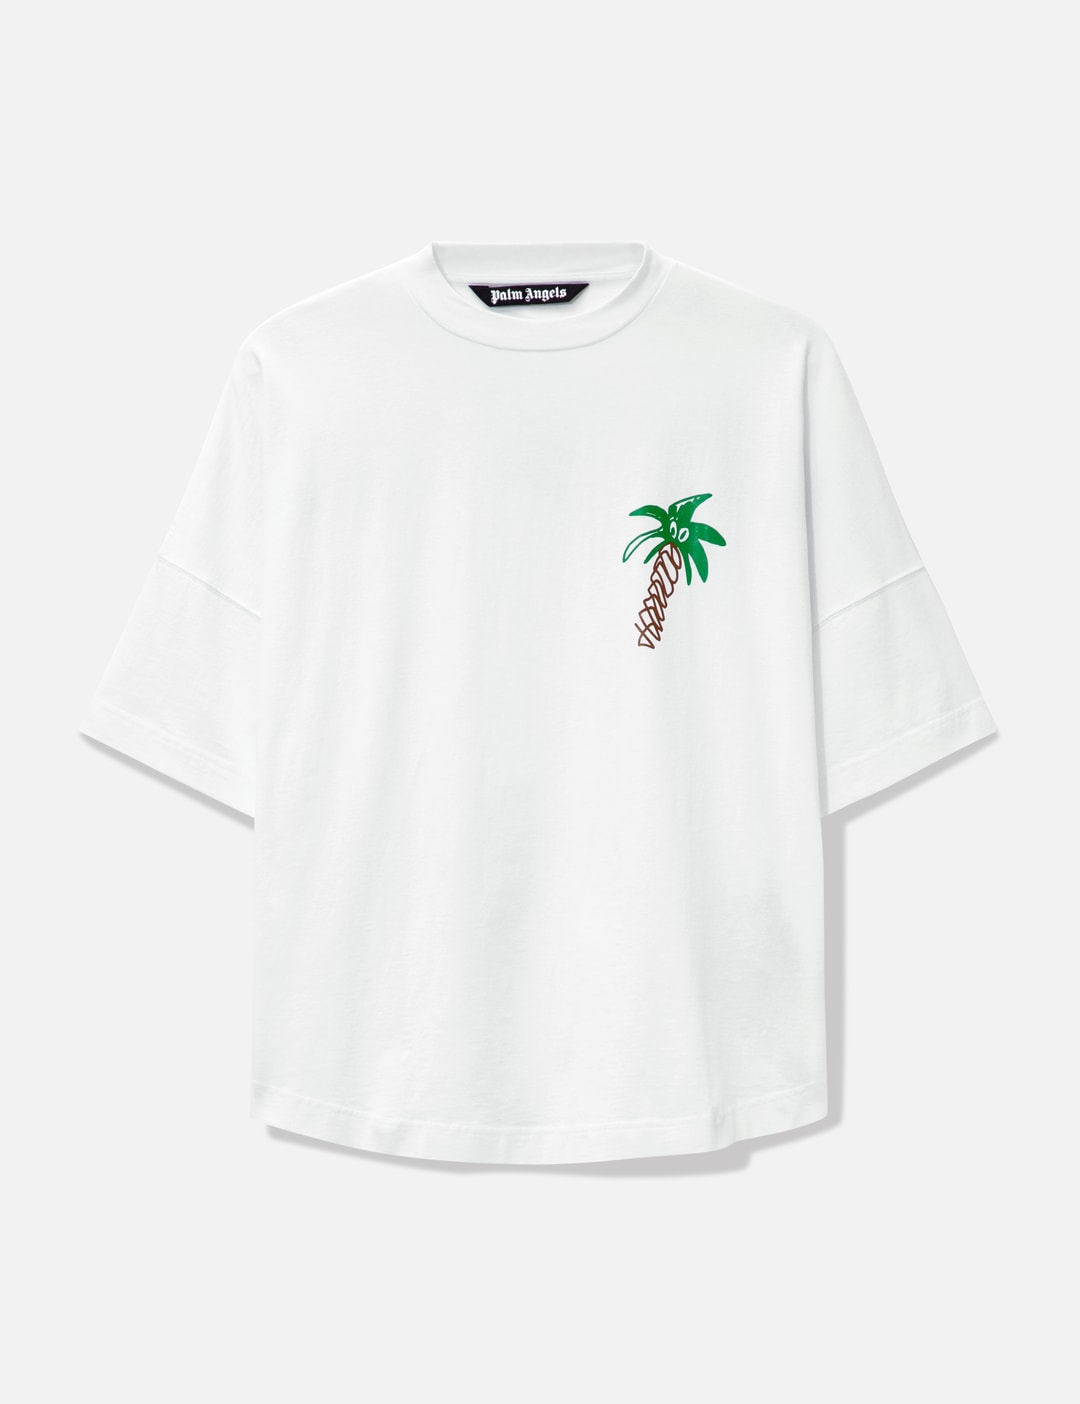 Palm Angels - Sketchy Over T-shirt | HBX - Globally Curated Fashion and ...